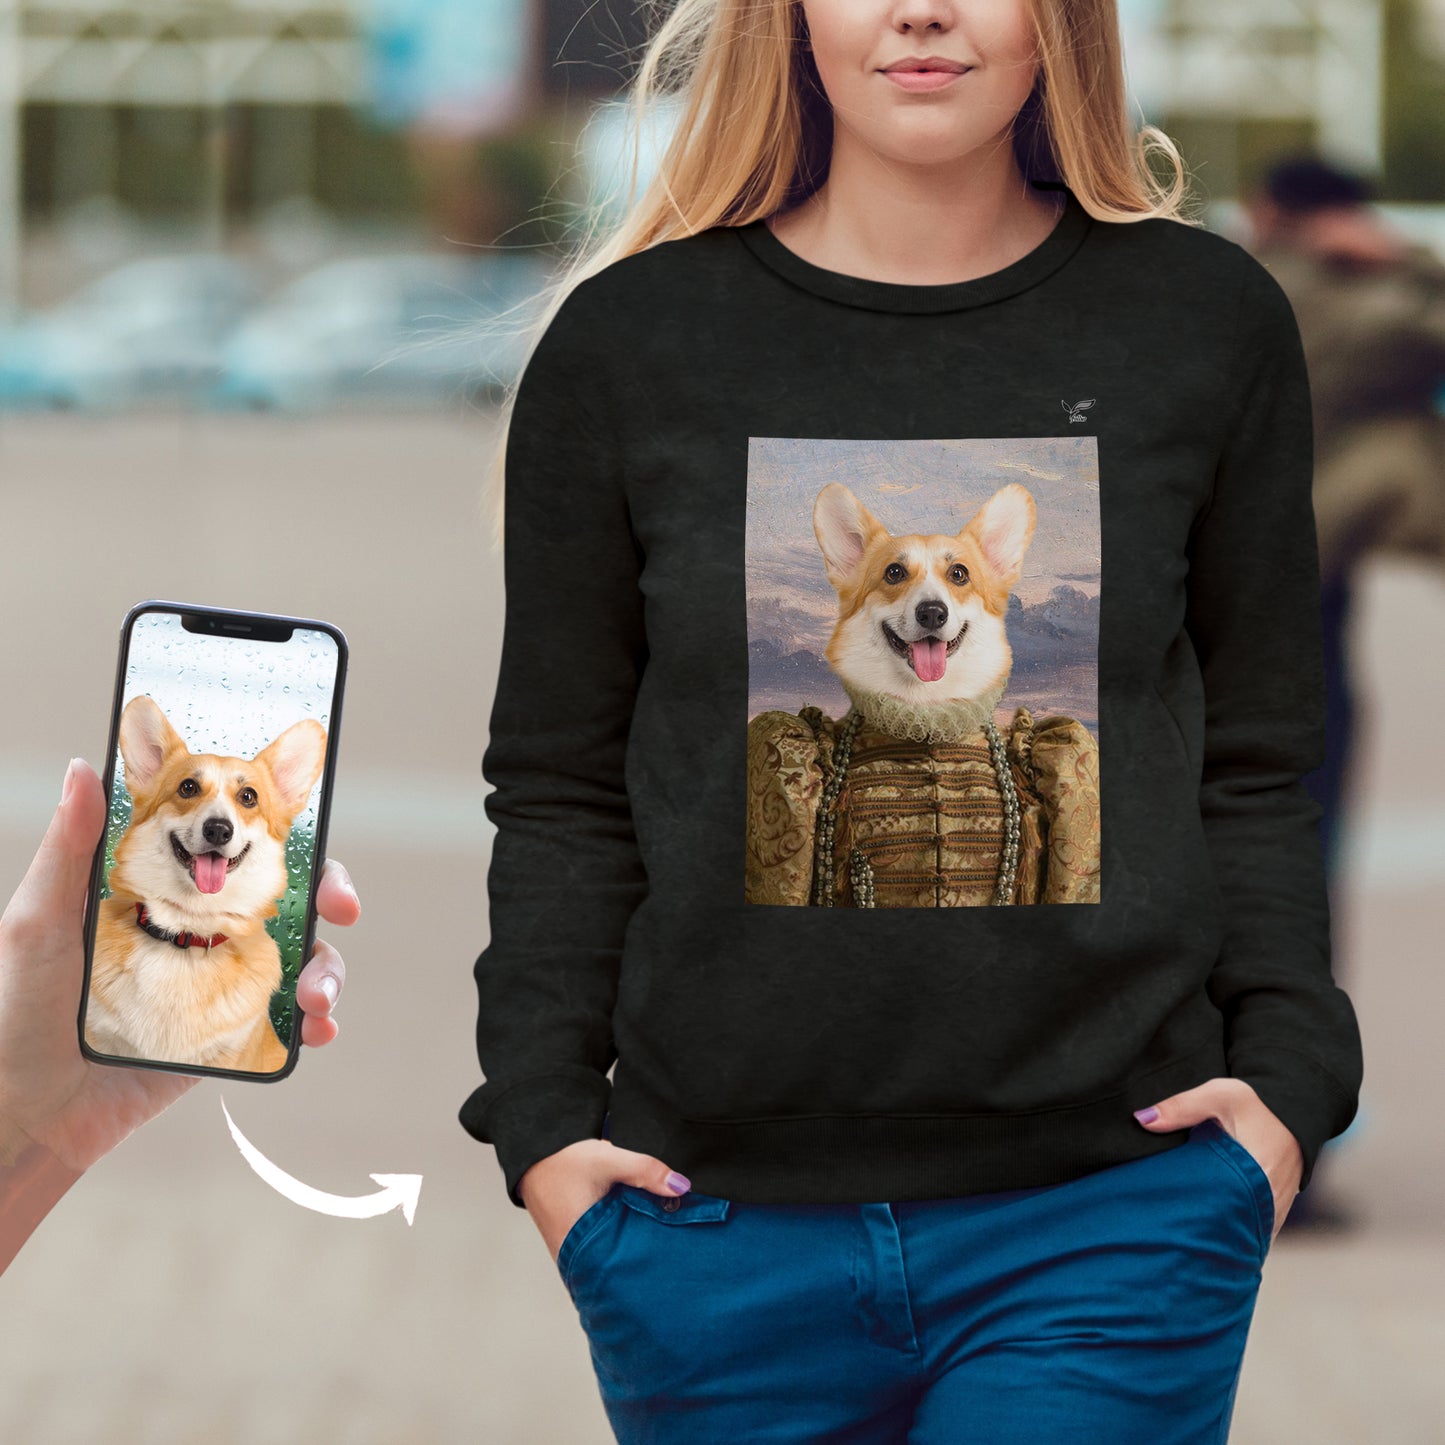 The Beautiful Queen - Personalized Sweatshirt With Your Pet's Photo